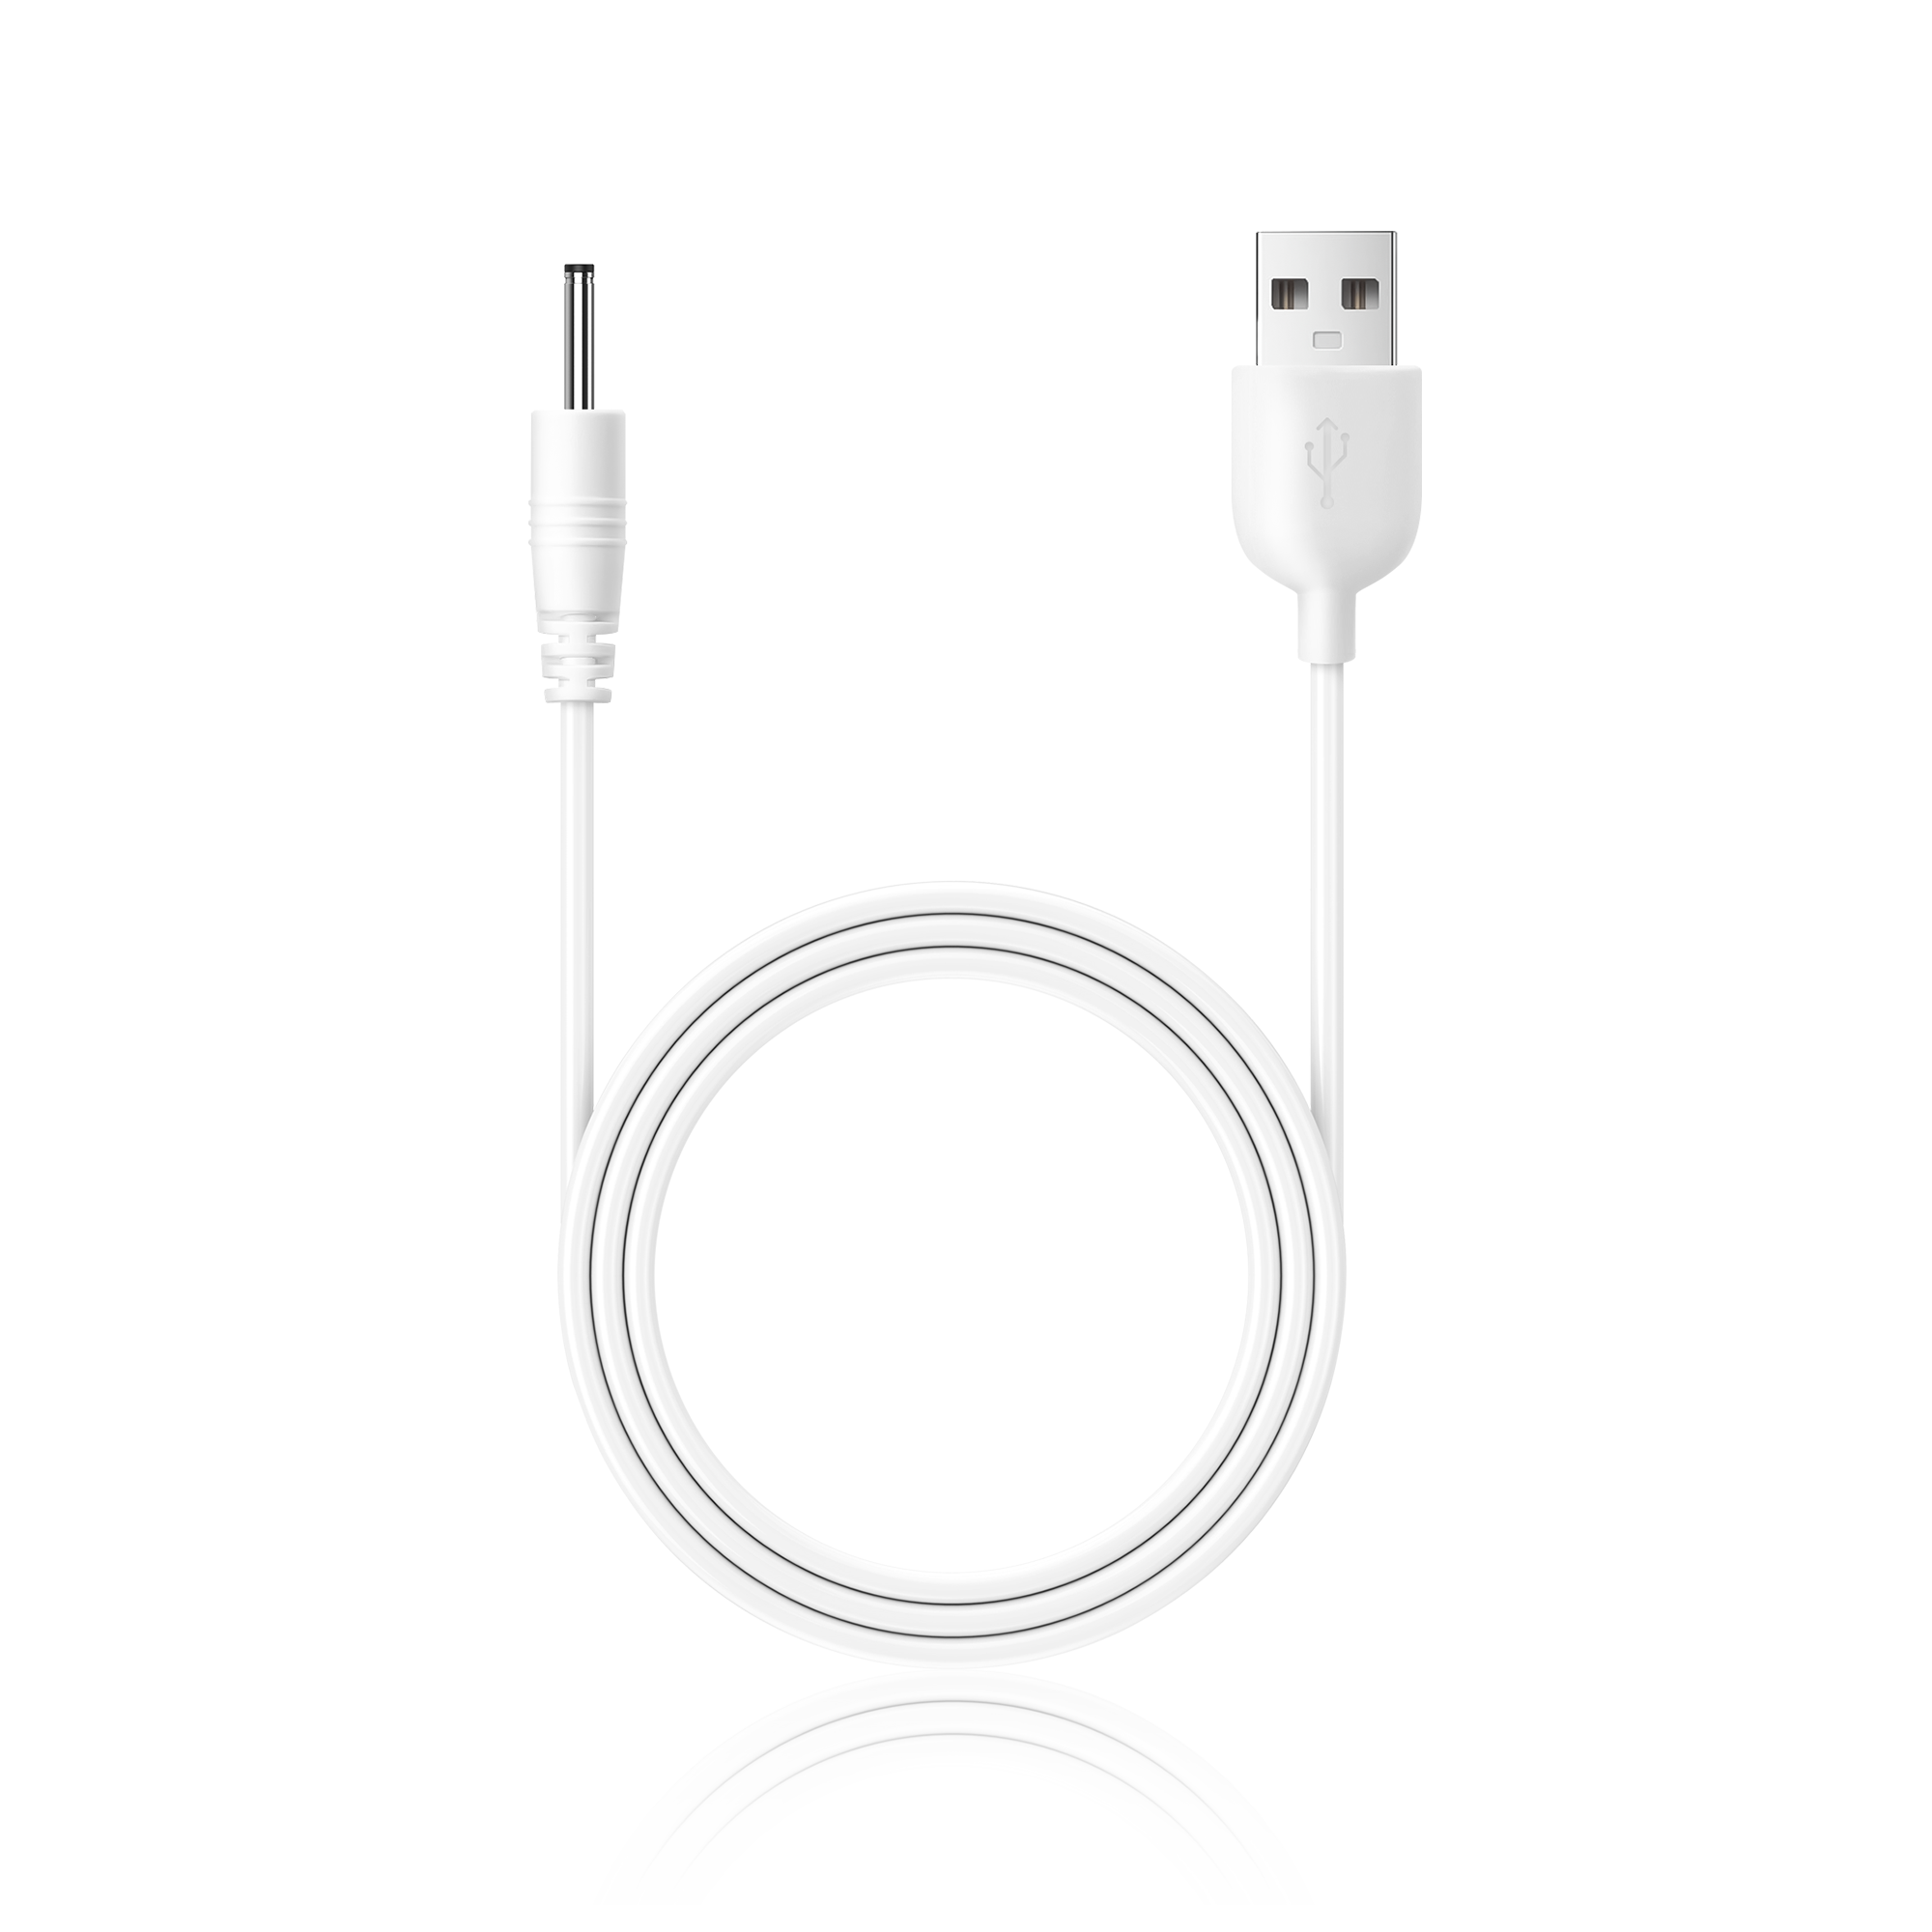 charge_cable-2.0_banner